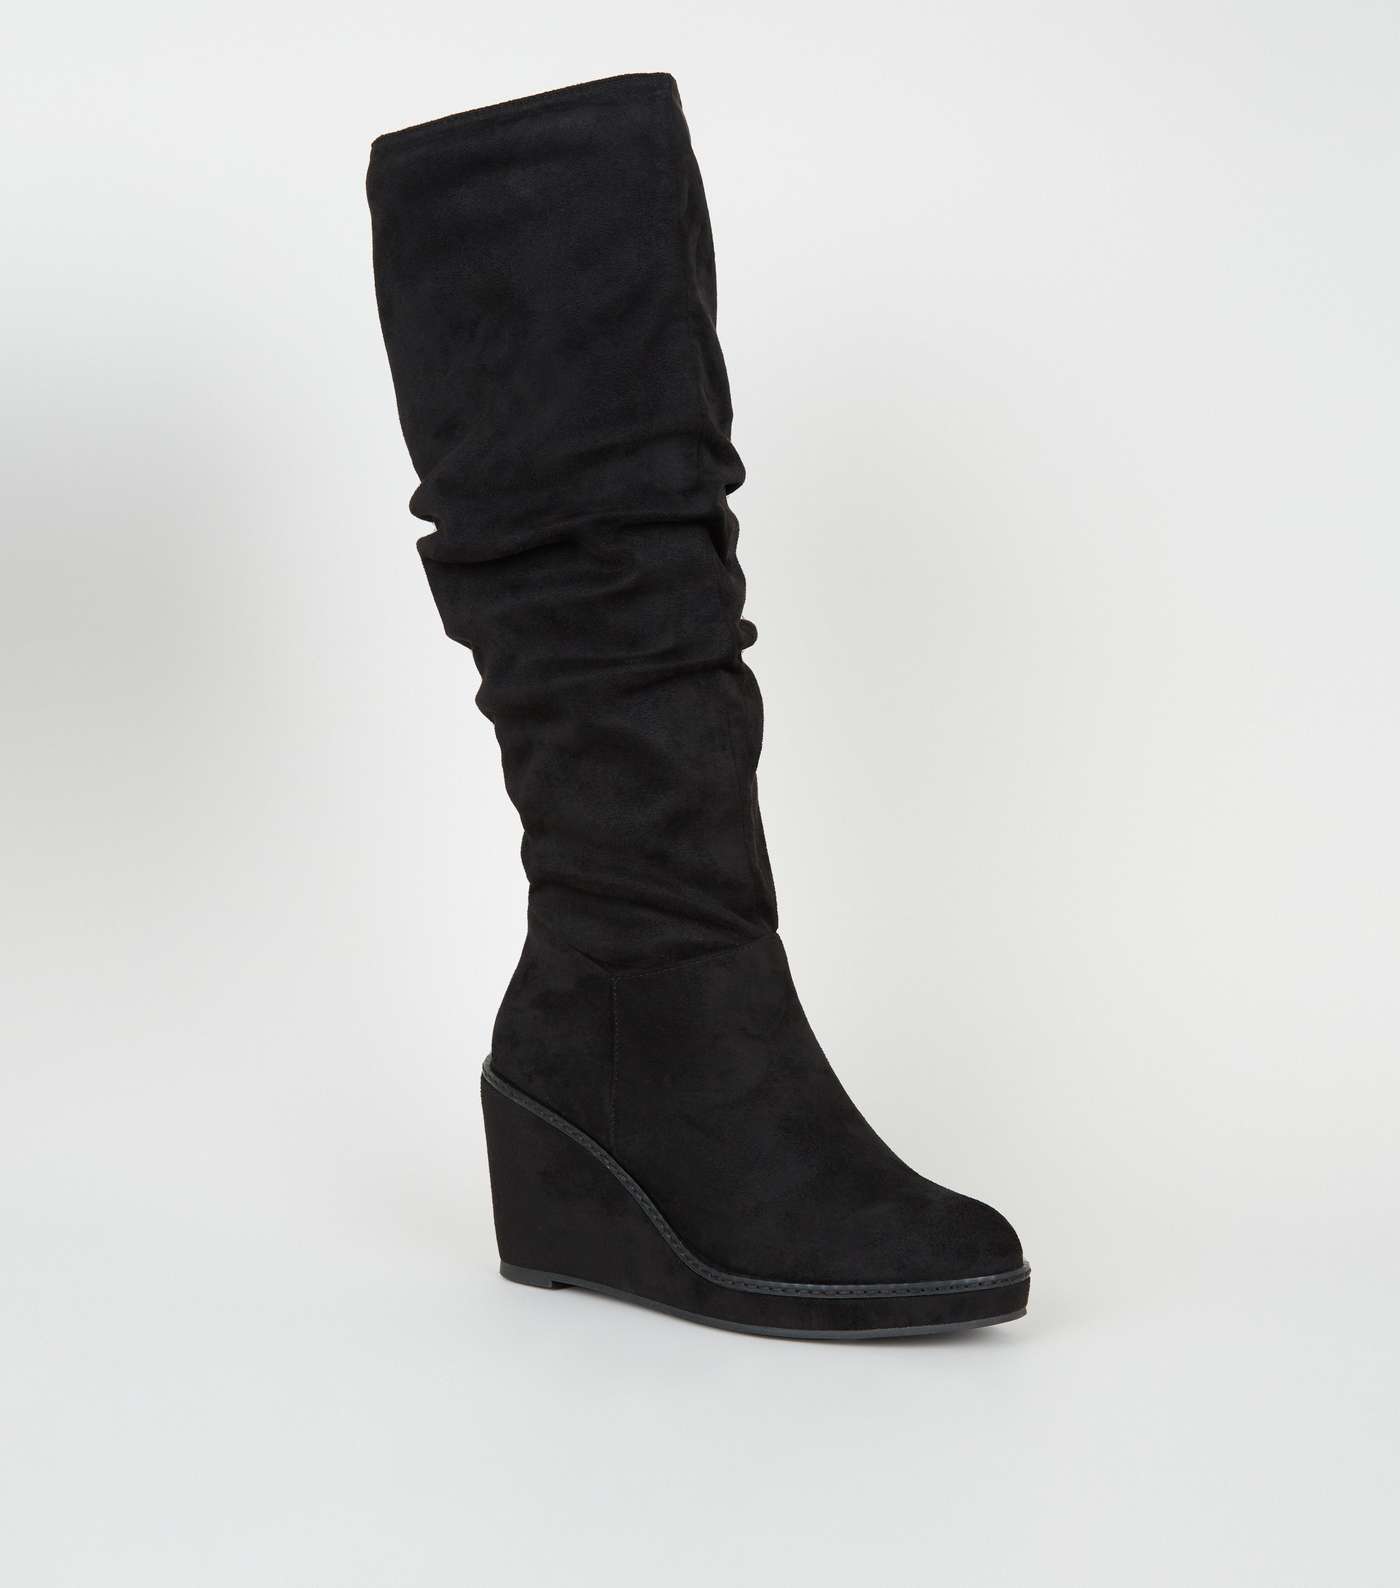 Black Suedette Knee High Slouch Wedge Boots